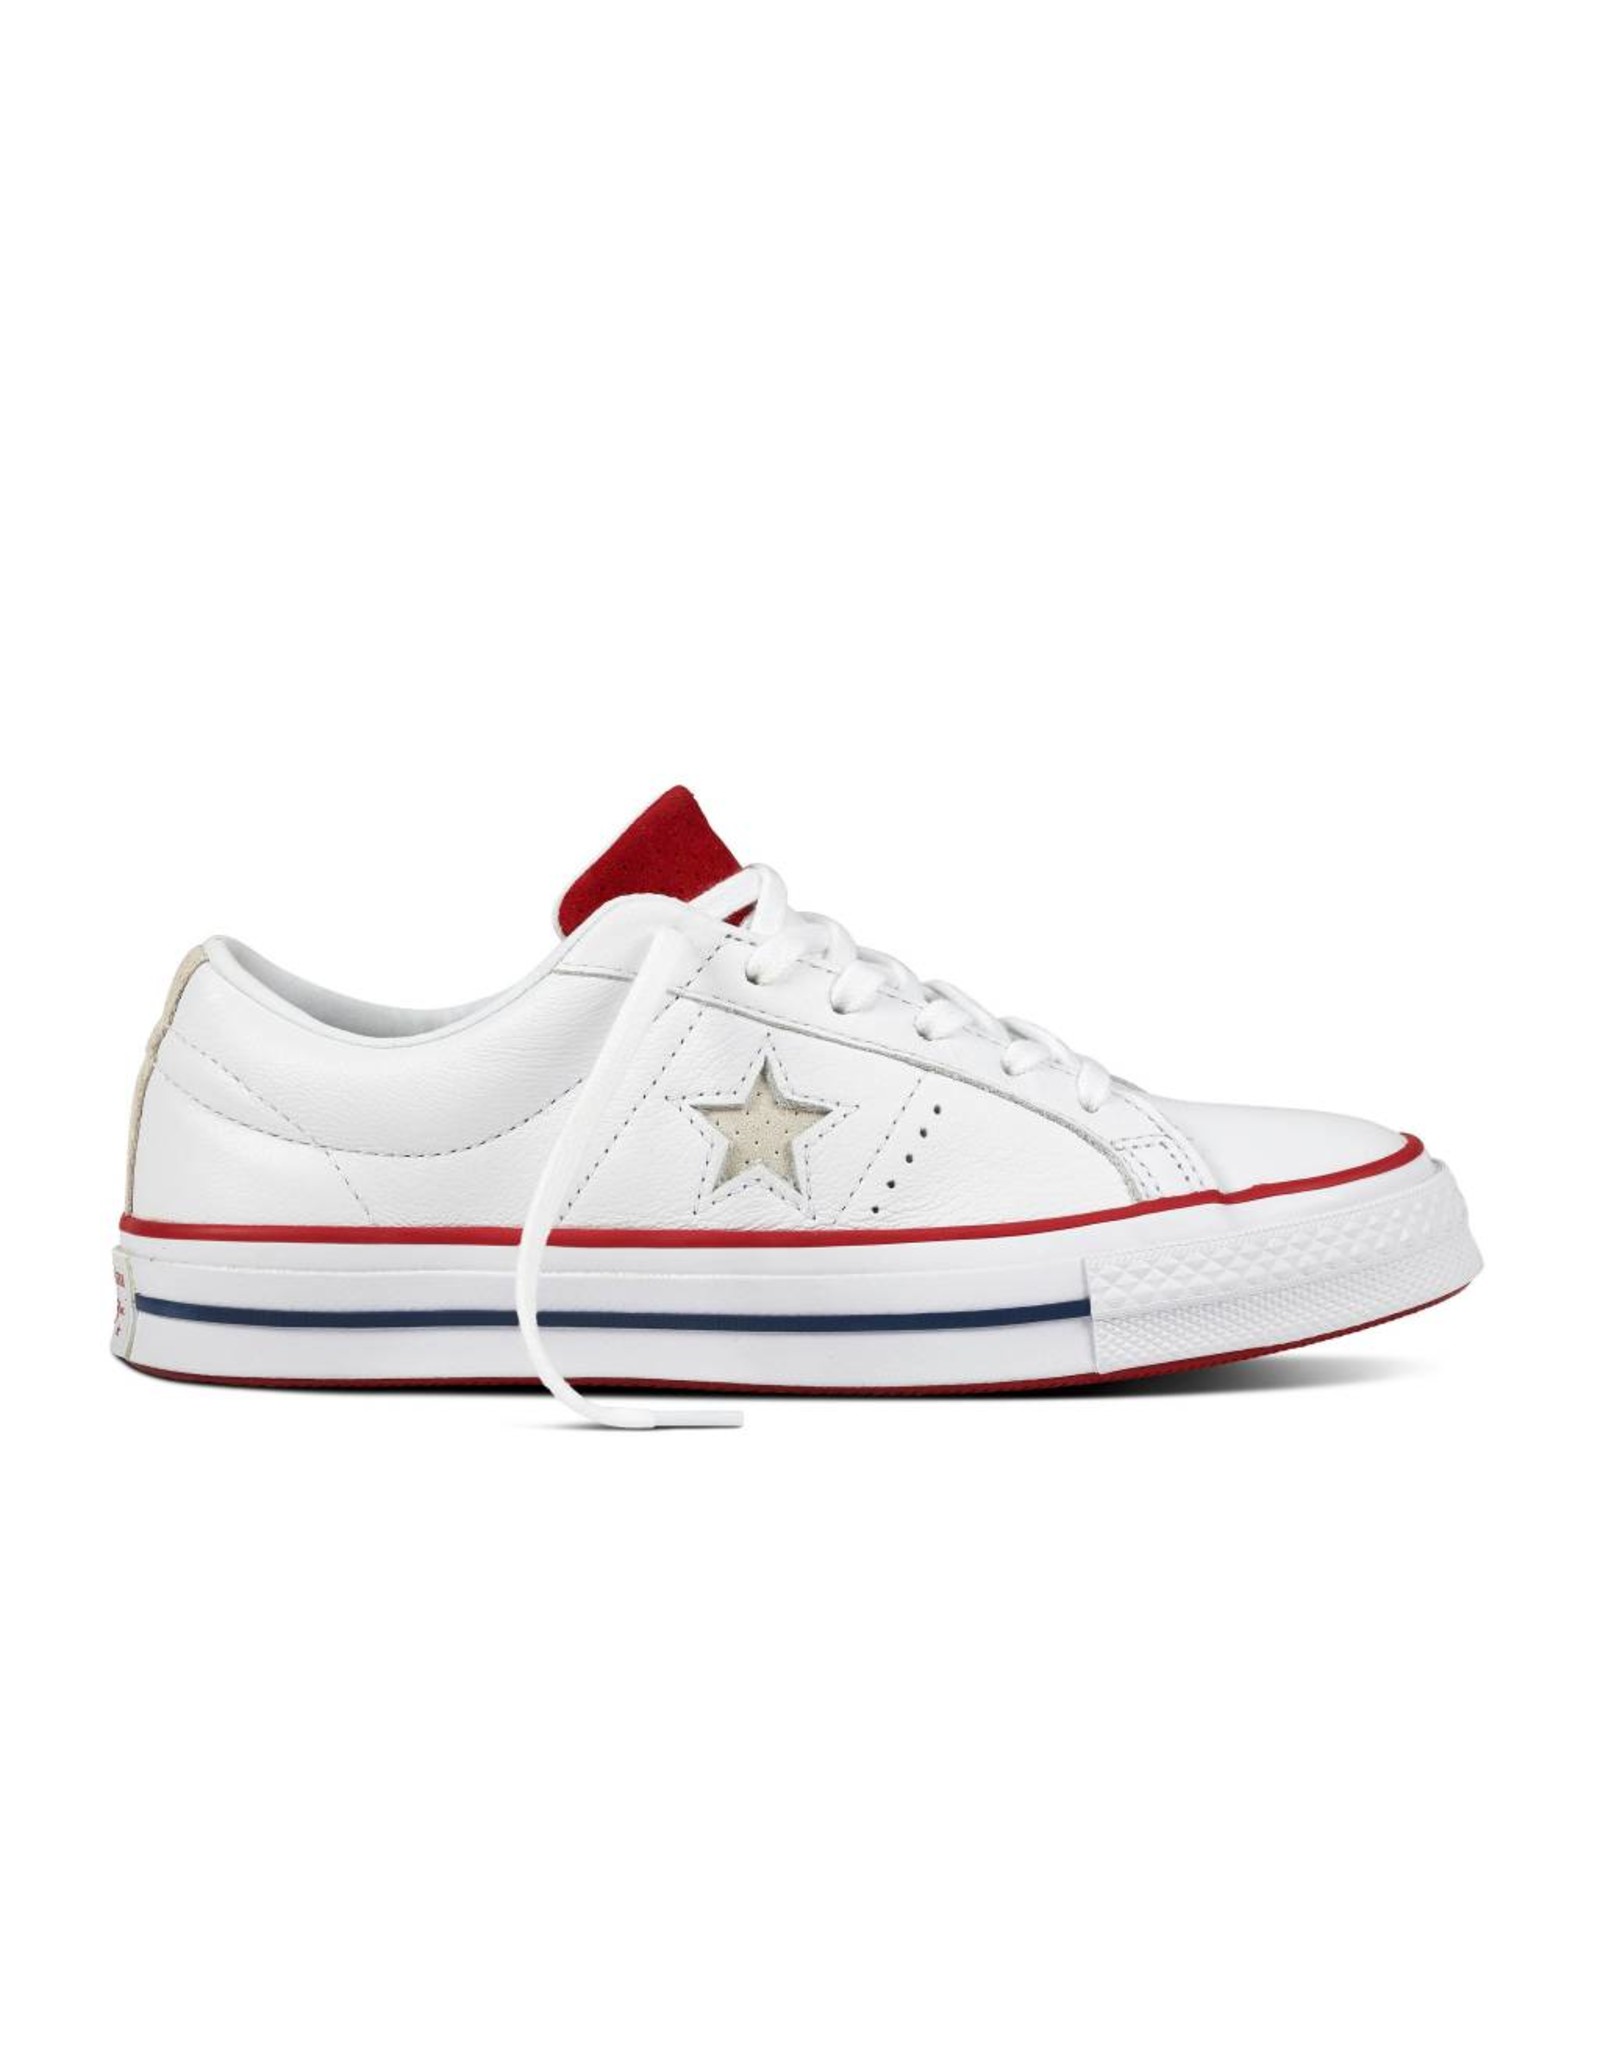 converse one star ox all star